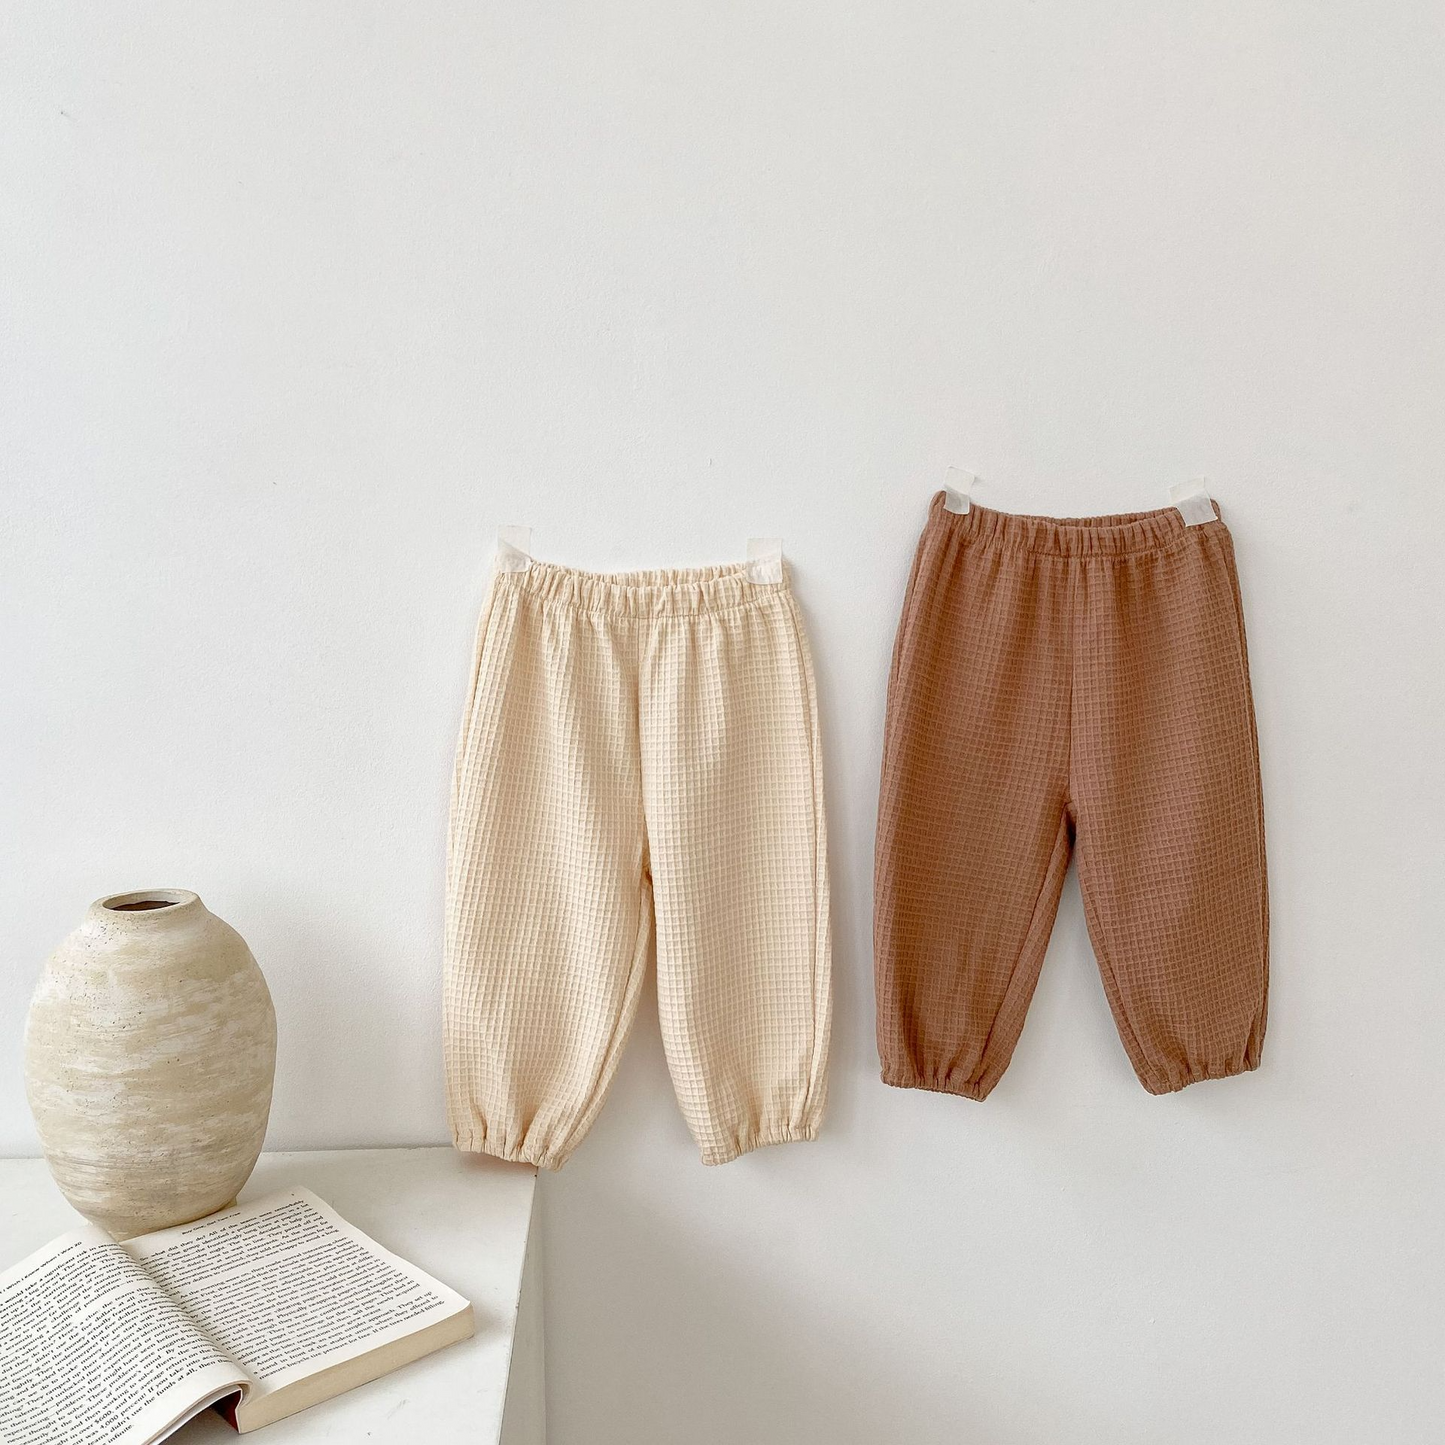 Summer Baby Trousers